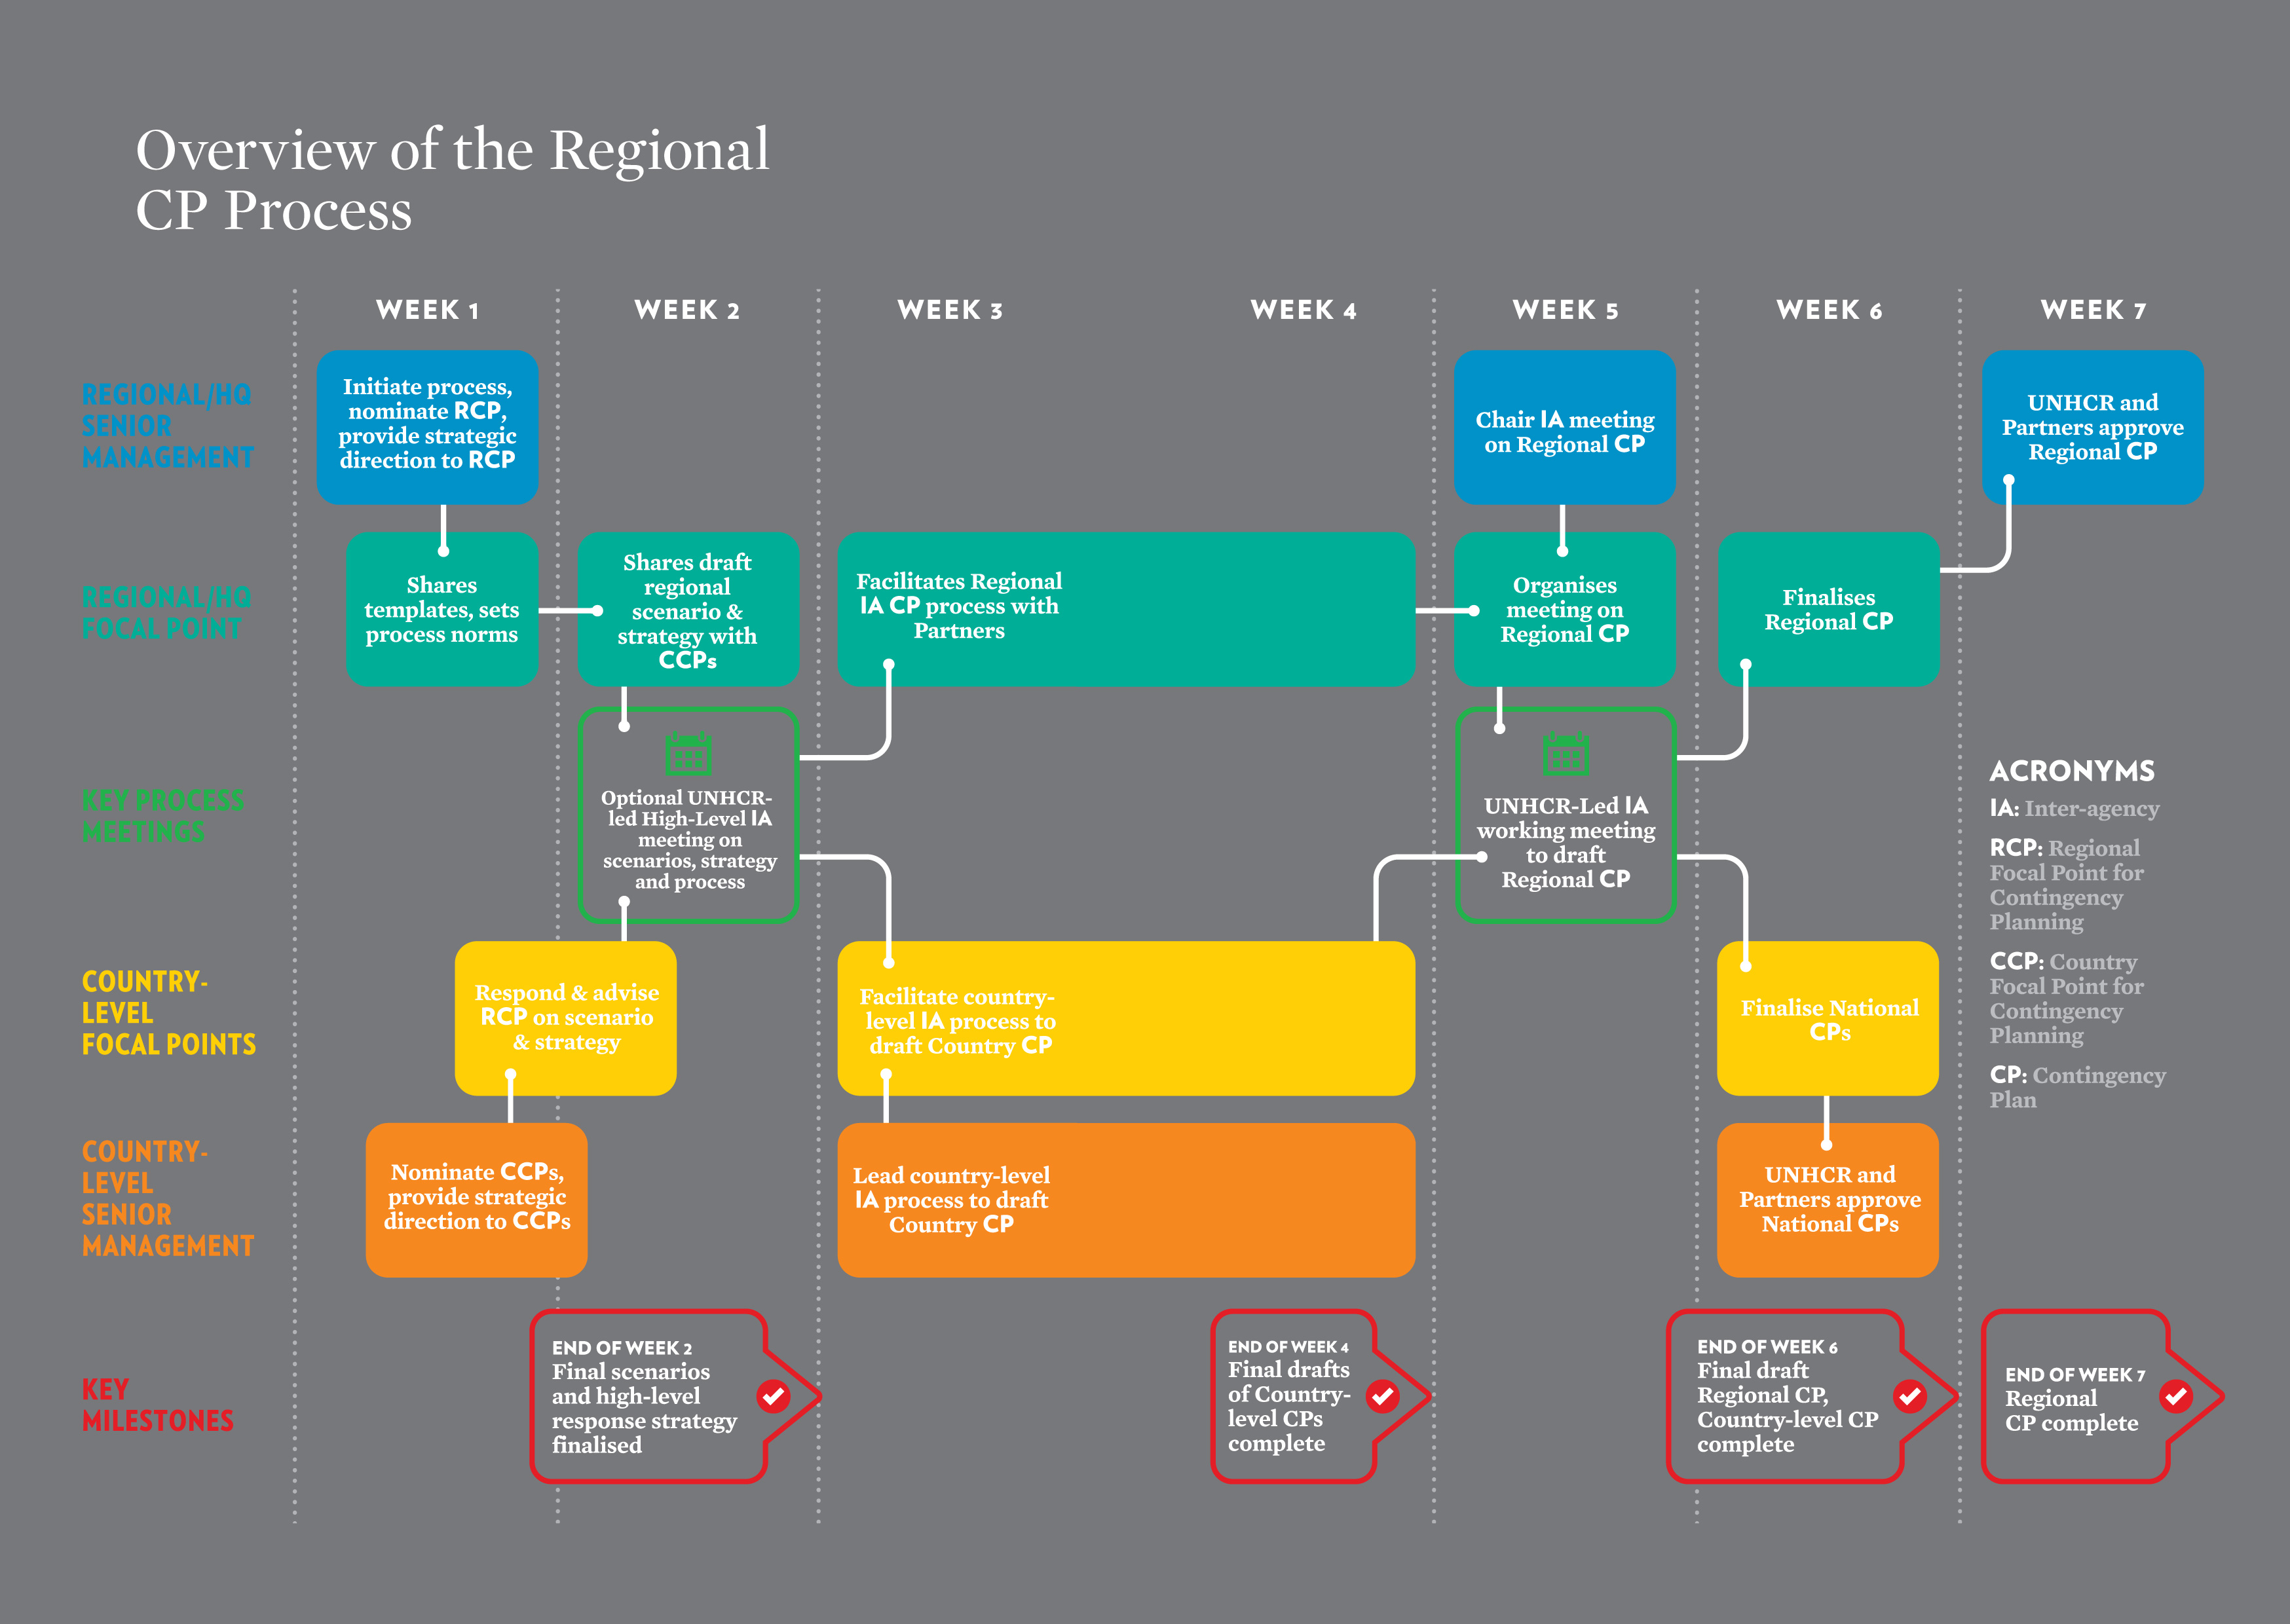 Overview of the regional CP process